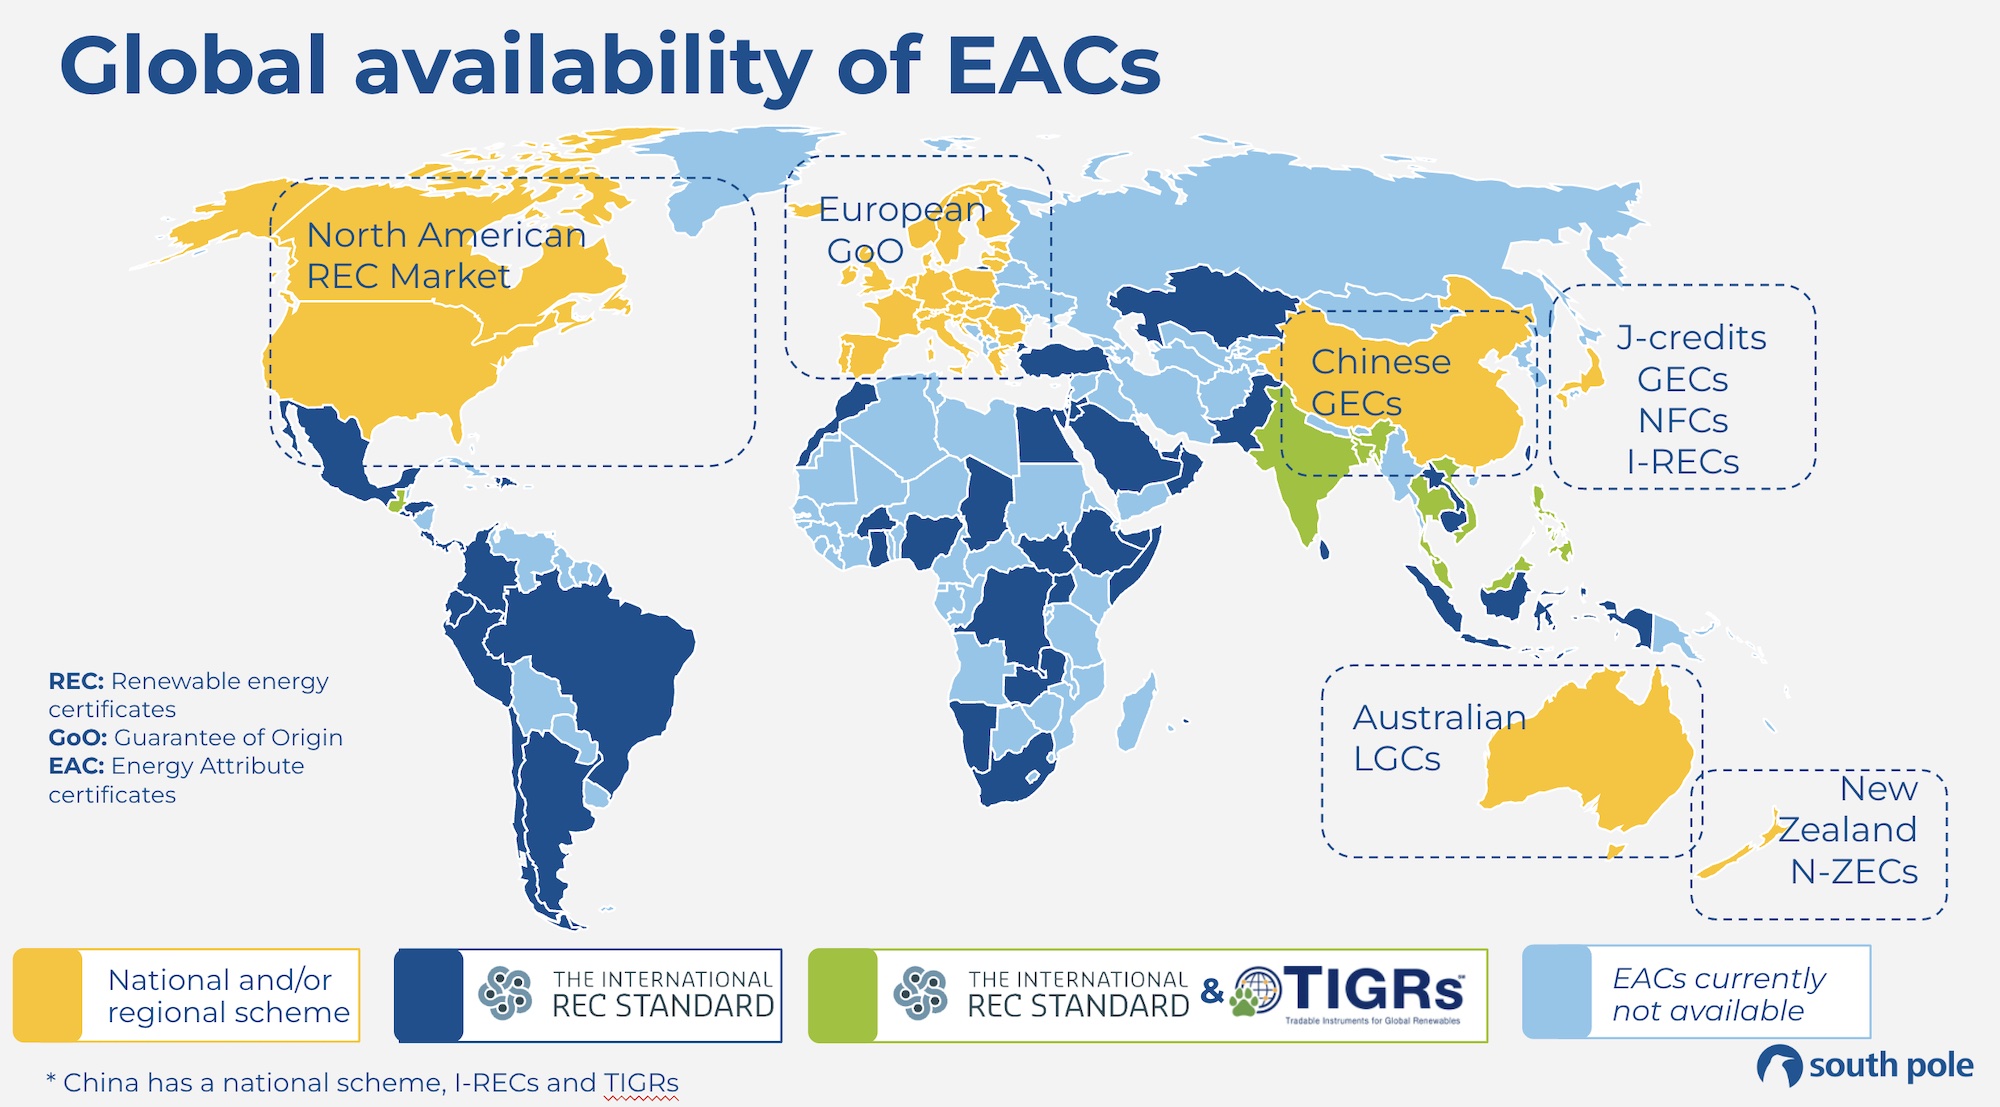 Map image - global availability of EACs